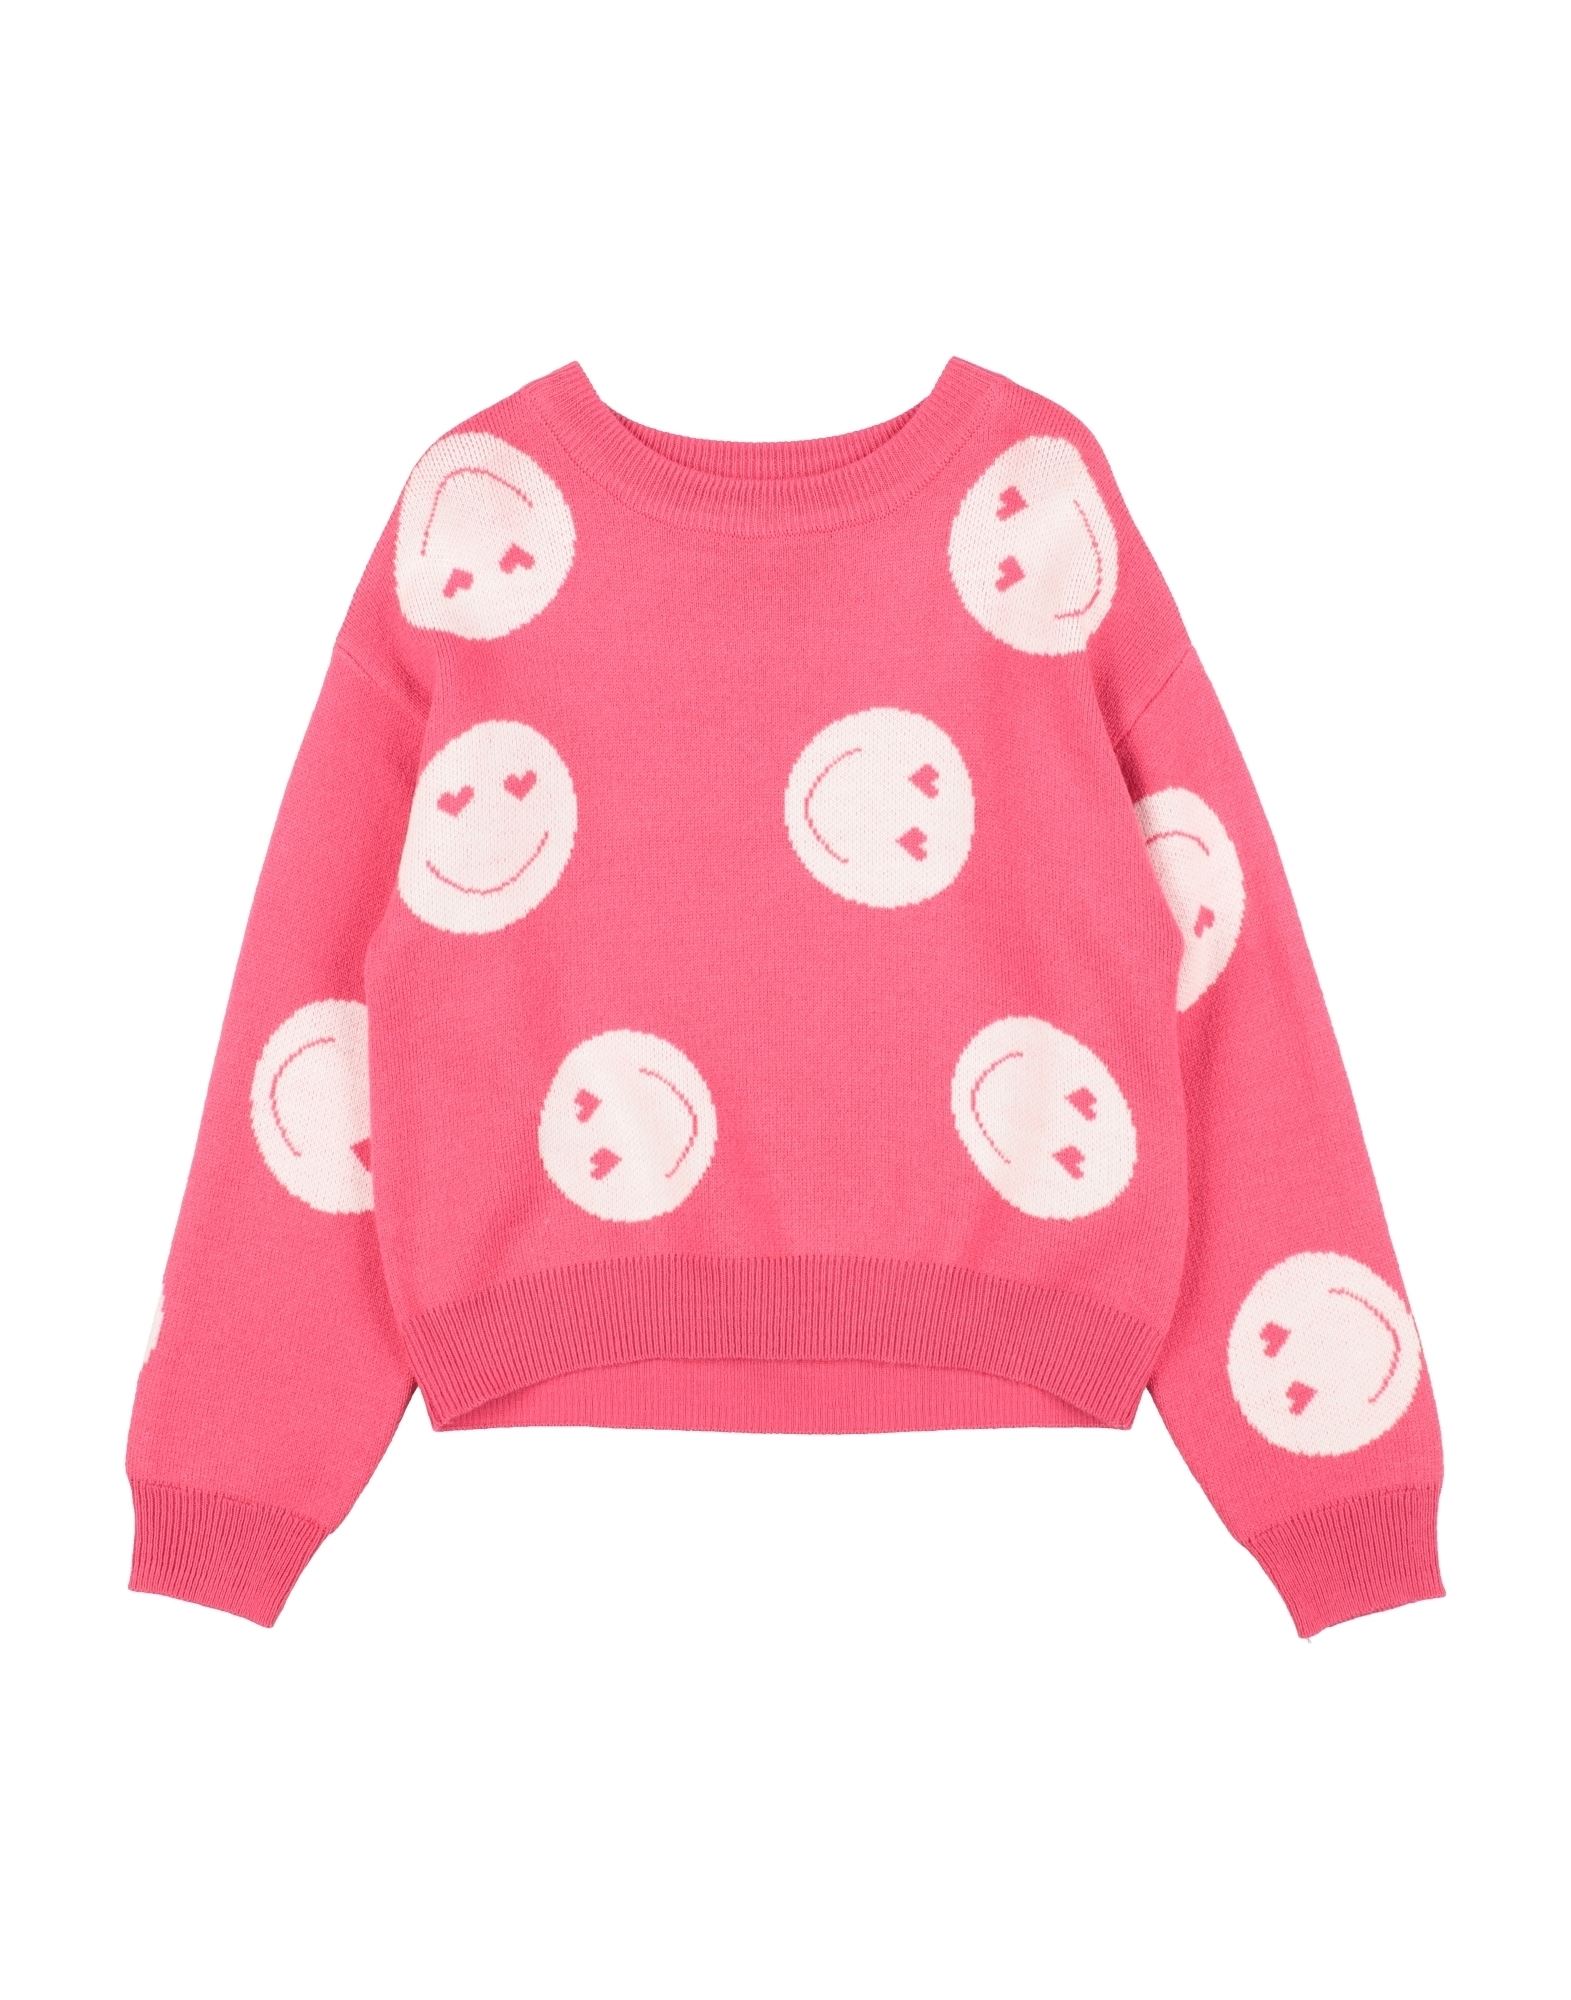 NAME IT® Pullover Kinder Rosa von NAME IT®